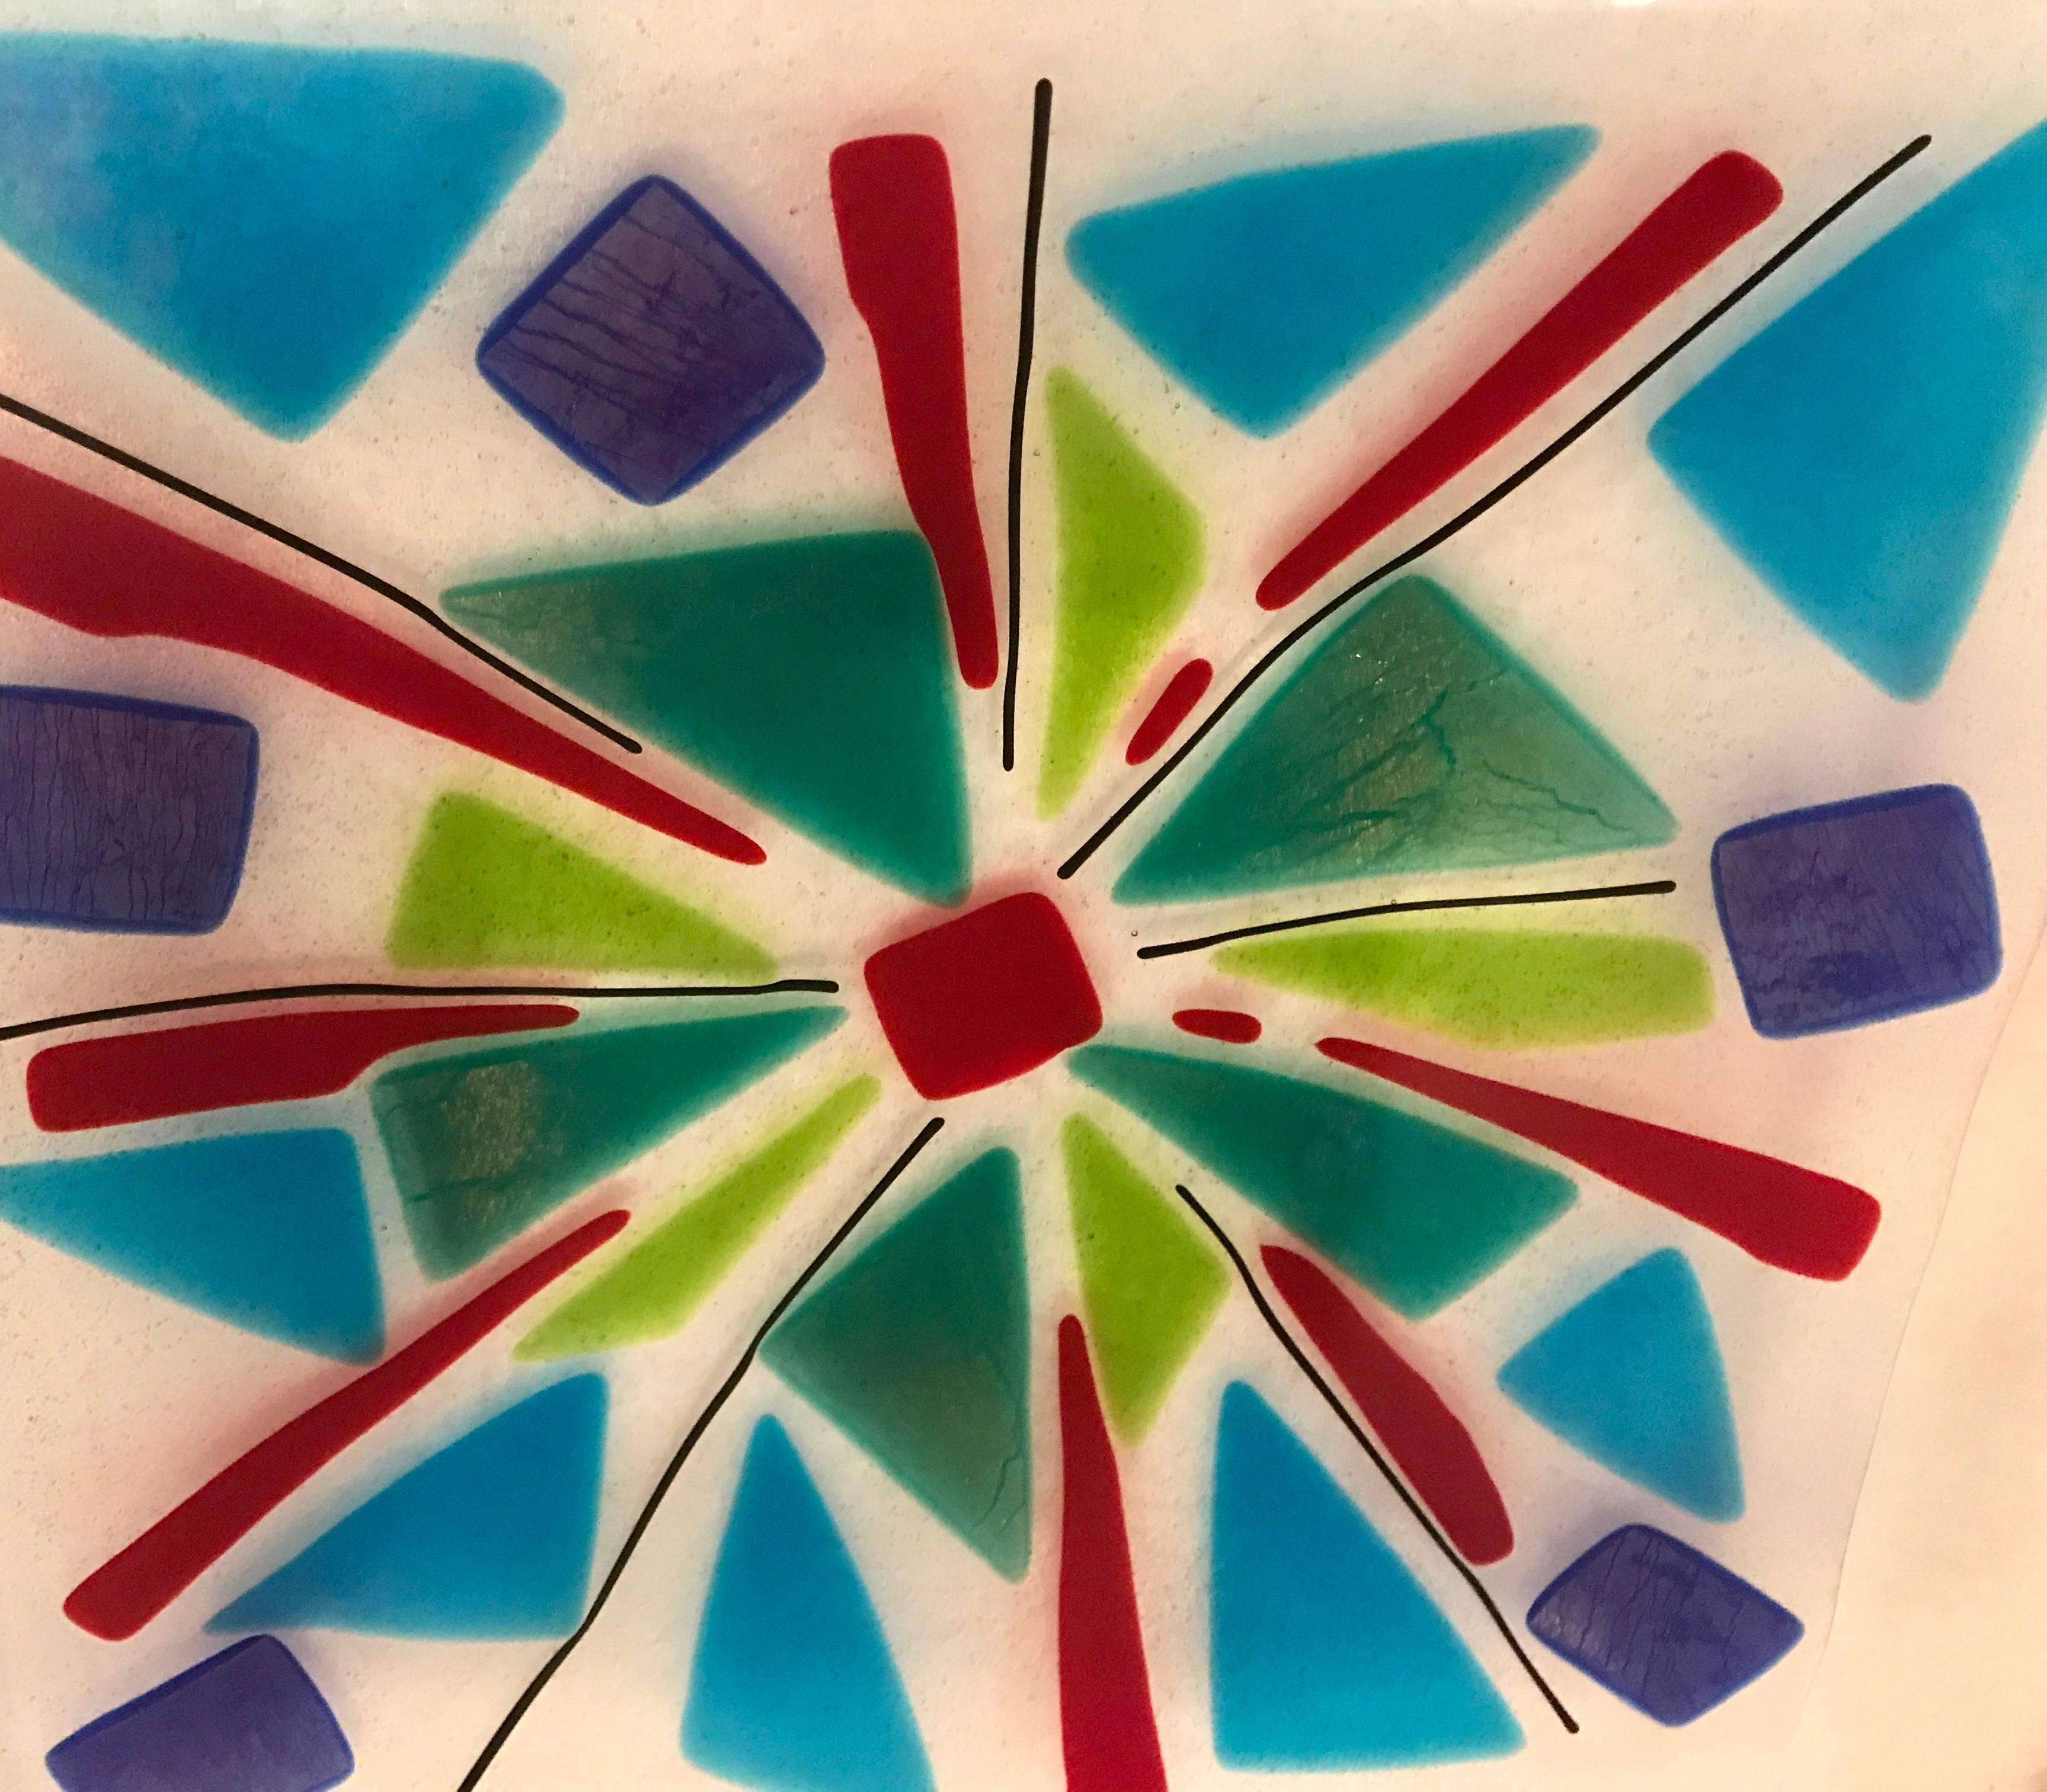 Beautiful mid century modern art glass tray or serving platter.  The vibrant colors are fused within the glass.  Maker unknown.